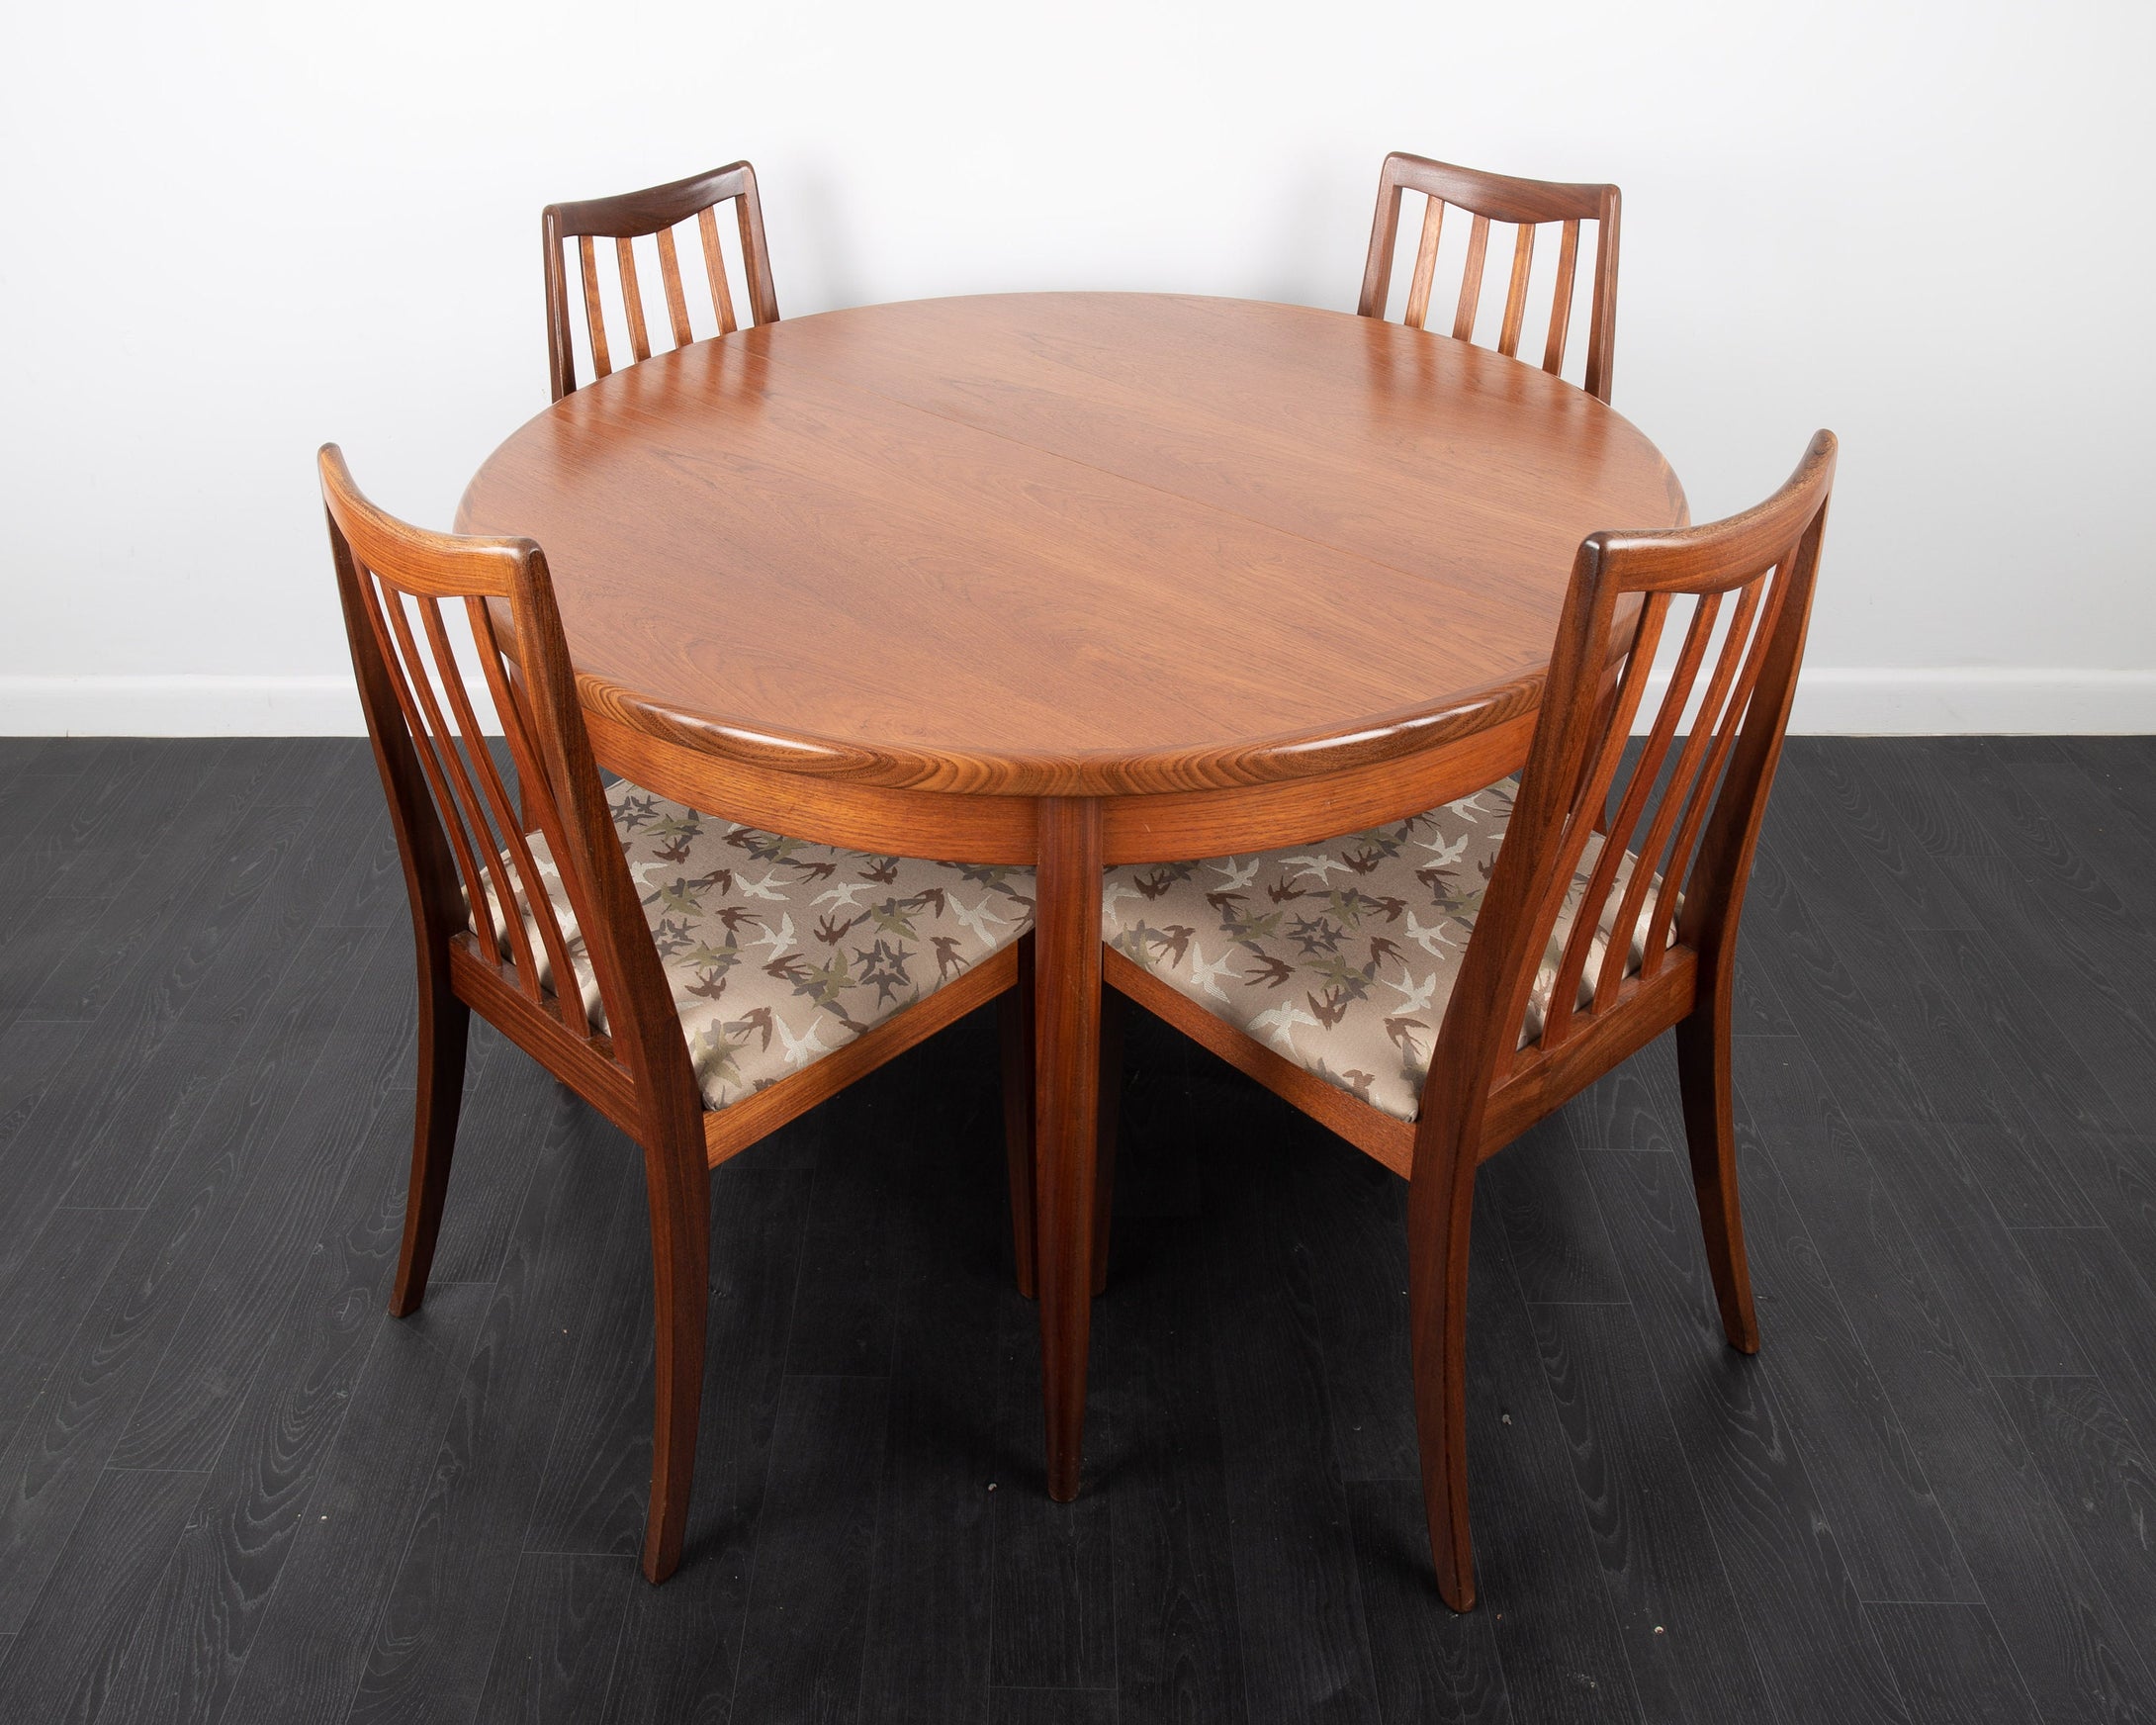 4 x Retro G Plan Teak Dining Chairs and Dining Table from the Fresco Range